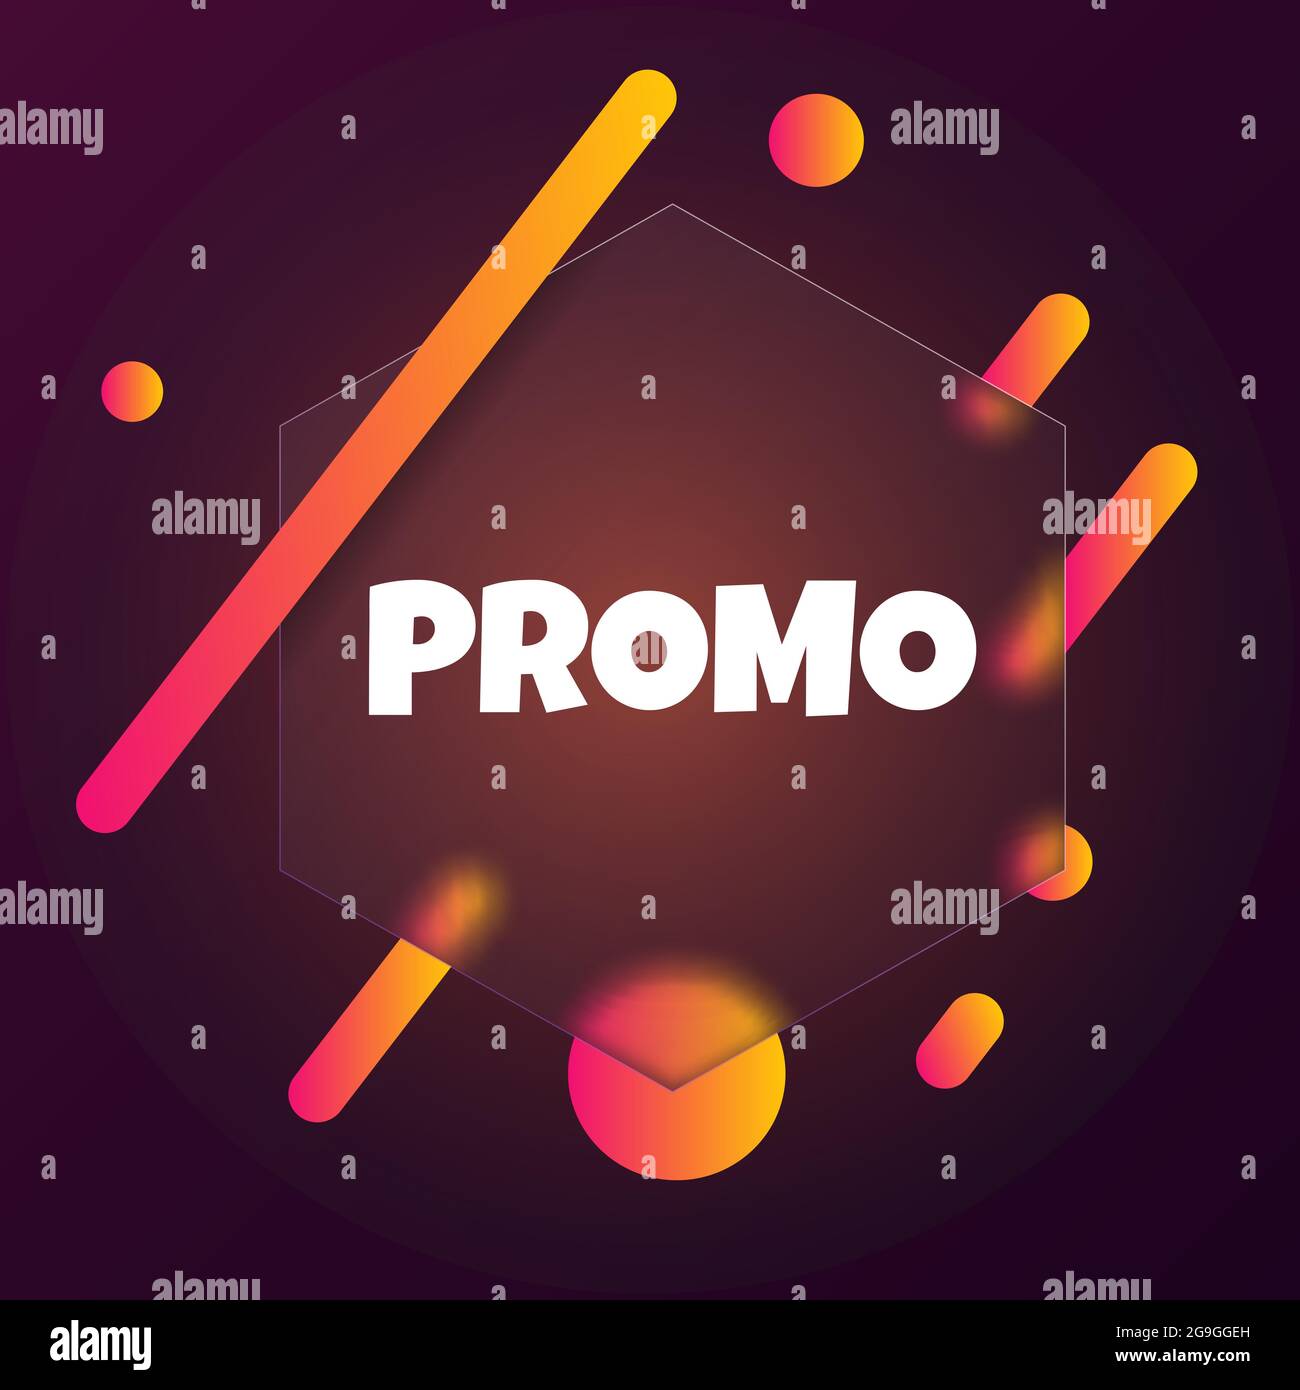 Promo. Speech bubble banner with Promo text. Glassmorphism style. For business, marketing and advertising. Vector on isolated background. EPS 10. Stock Vector